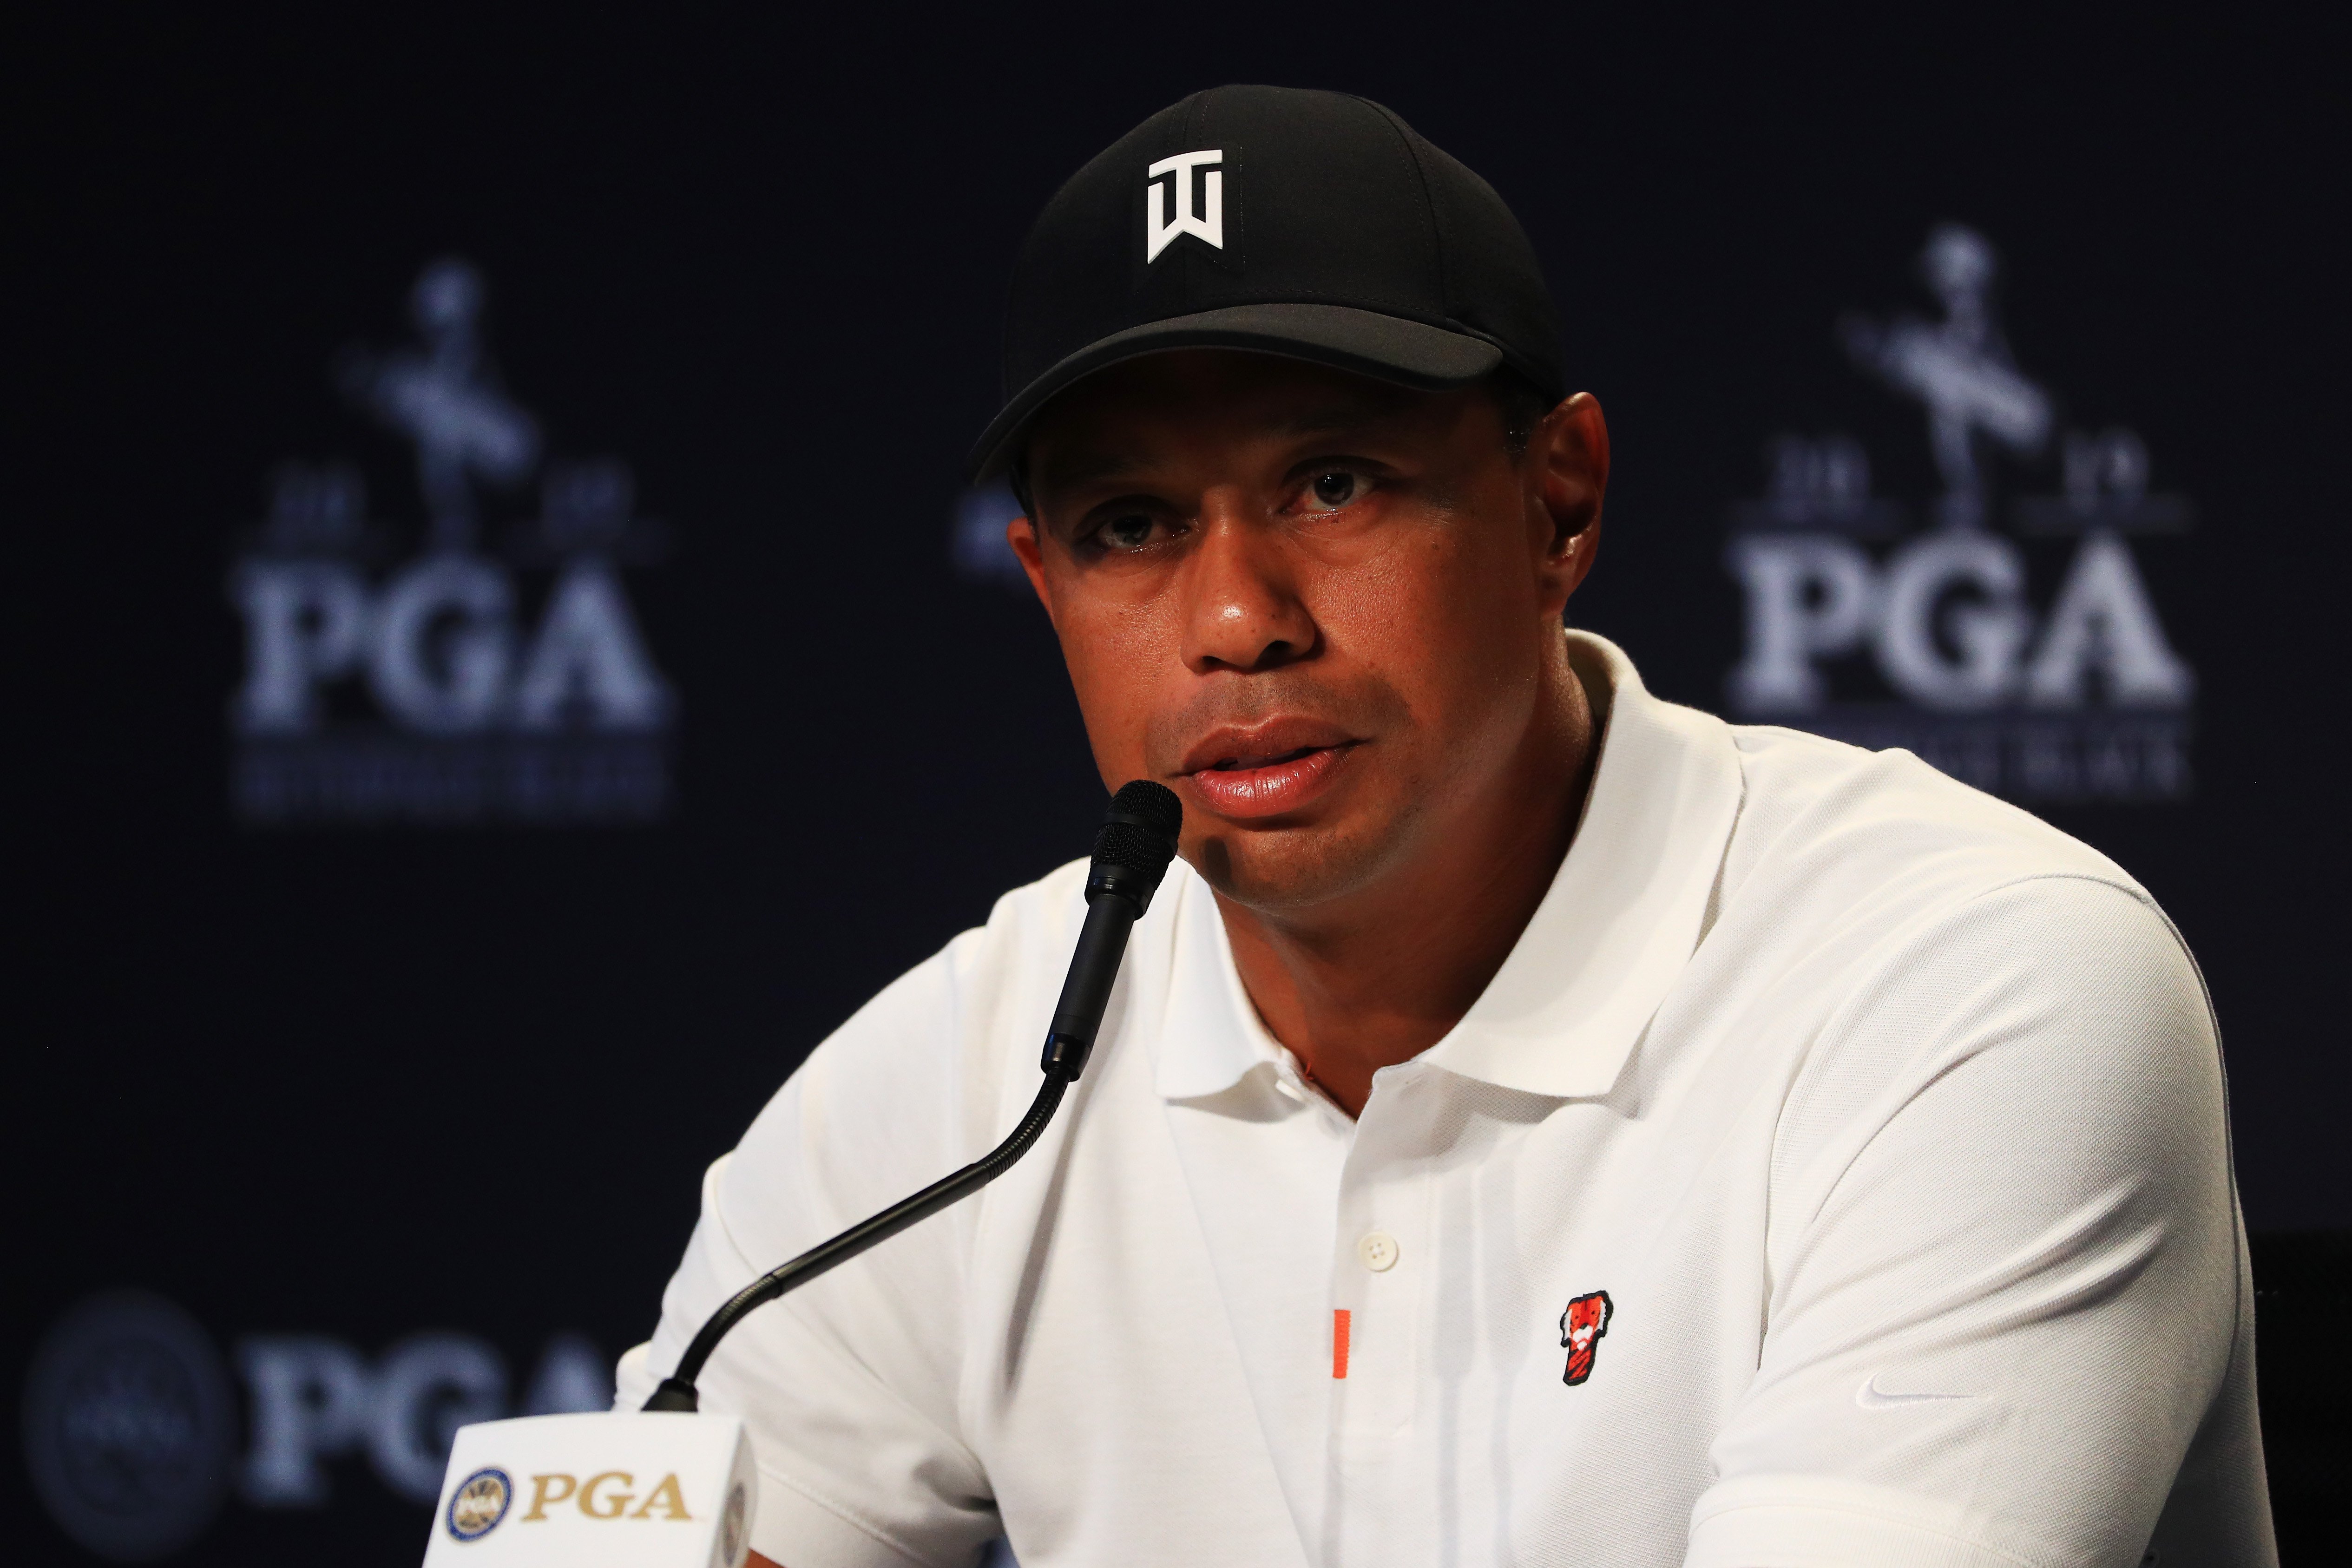 Tiger Woods during a press conference prior to the 2019 PGA Championship at the Bethpage Black course on May 14, 2019. | Photo: GettyImages